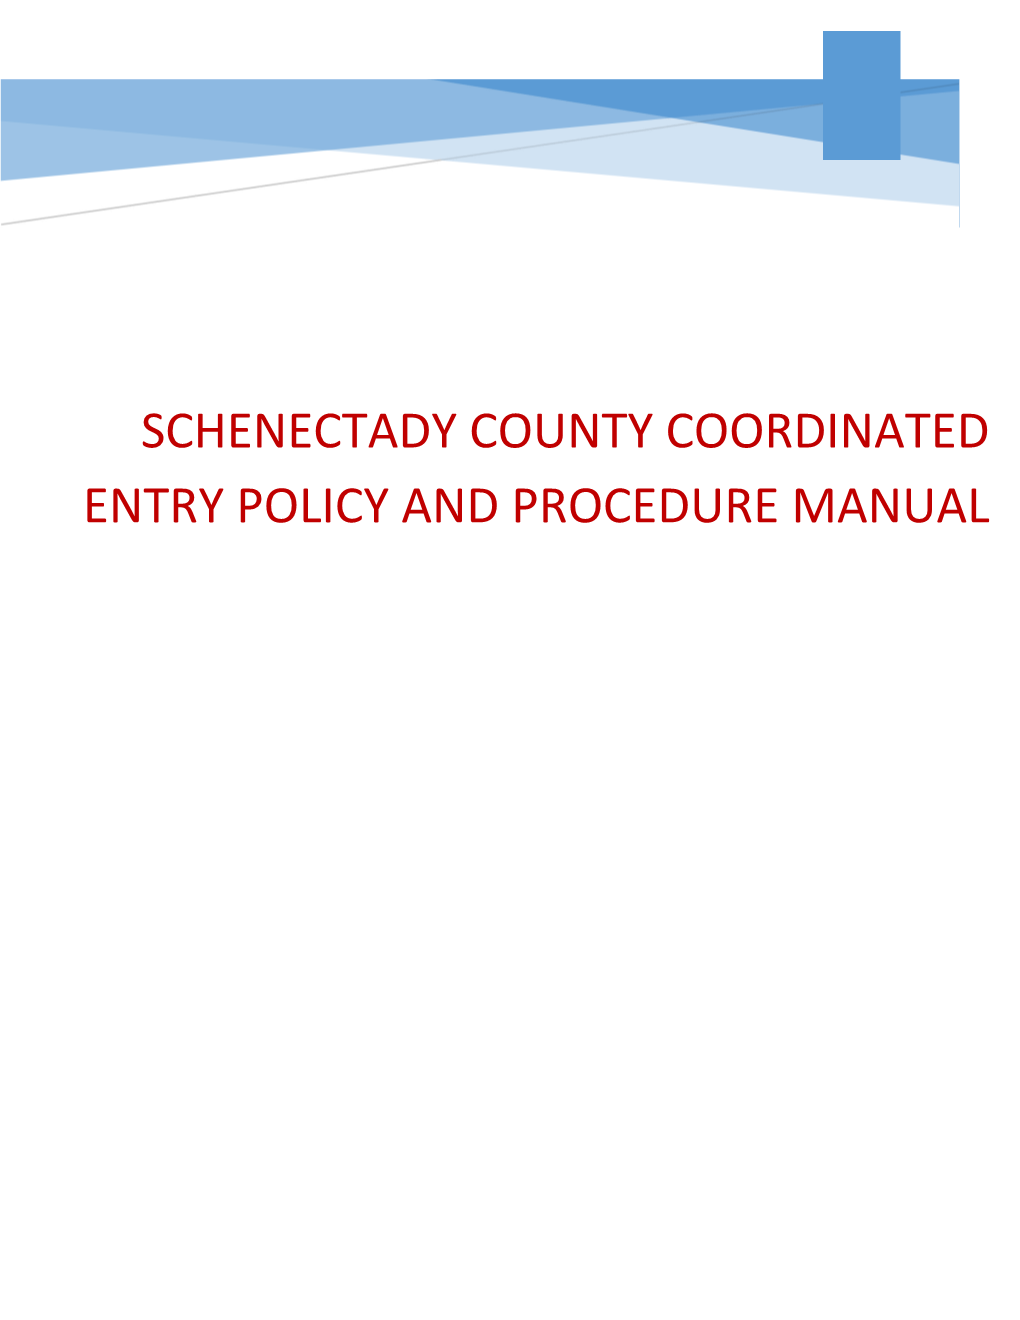 Schenectady County Coordinated Entry Policy and Procedure Manual